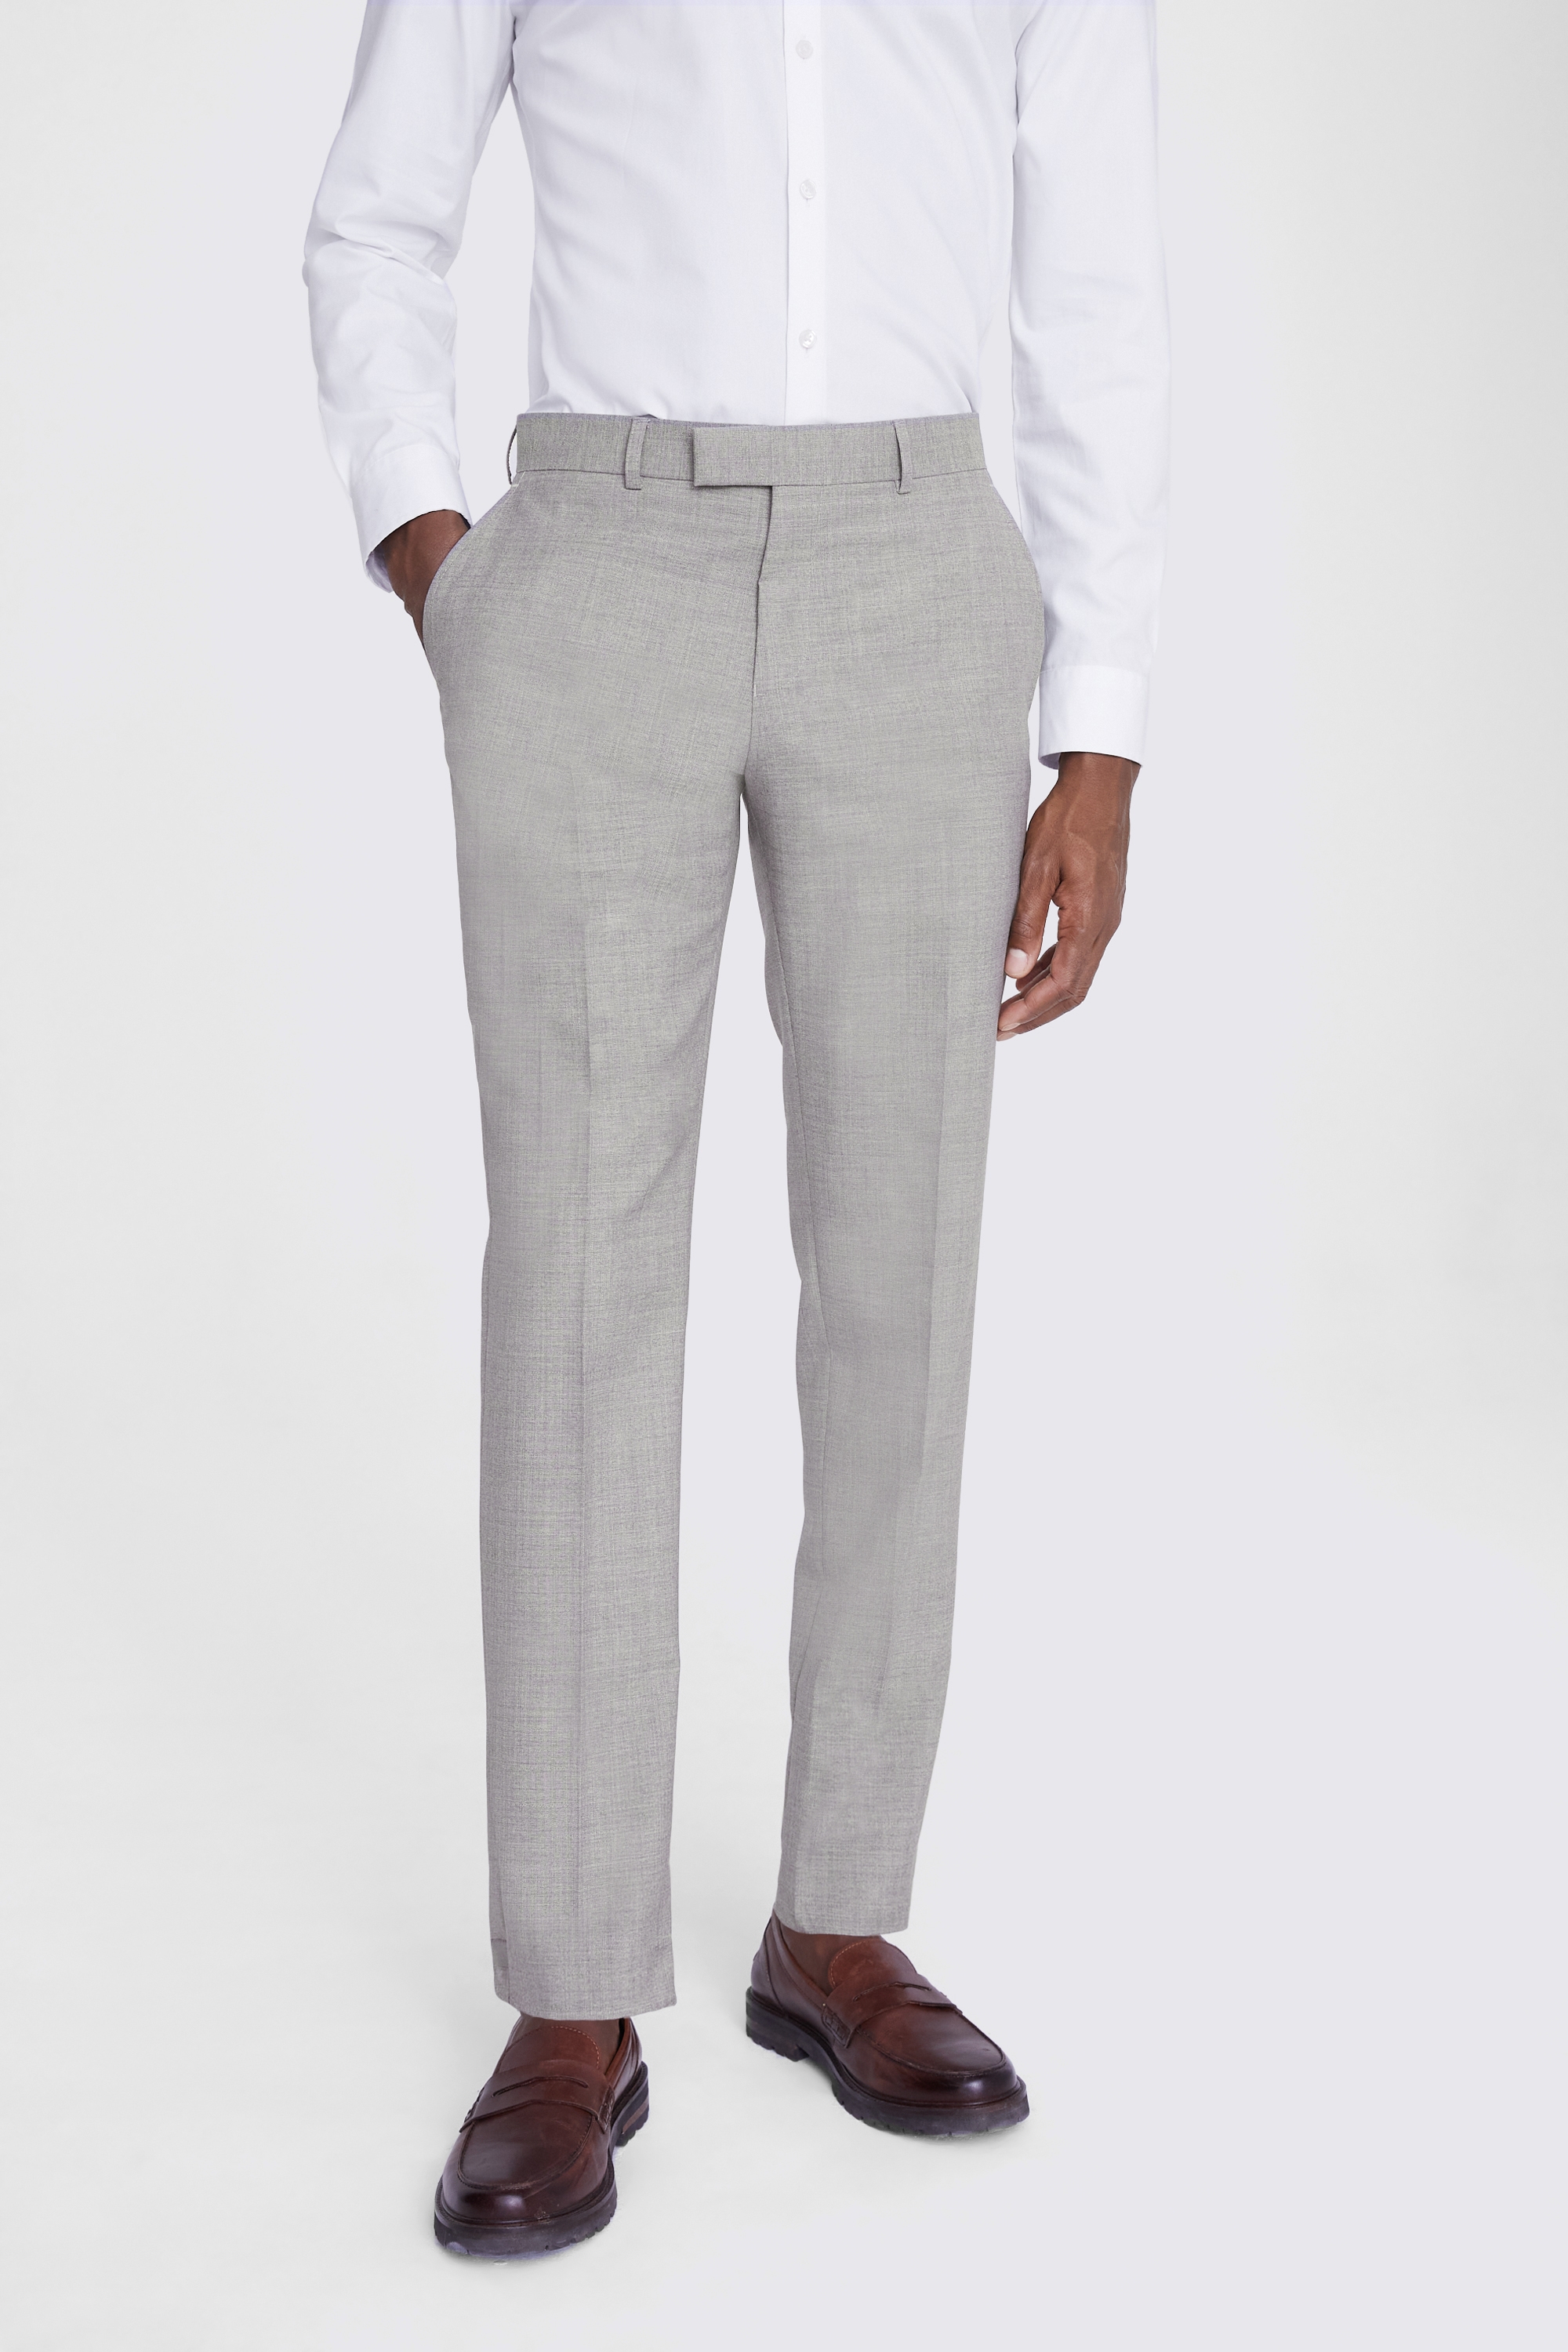 Italian Tailored Fit Neutral Half Lined Trousers | Buy Online at Moss